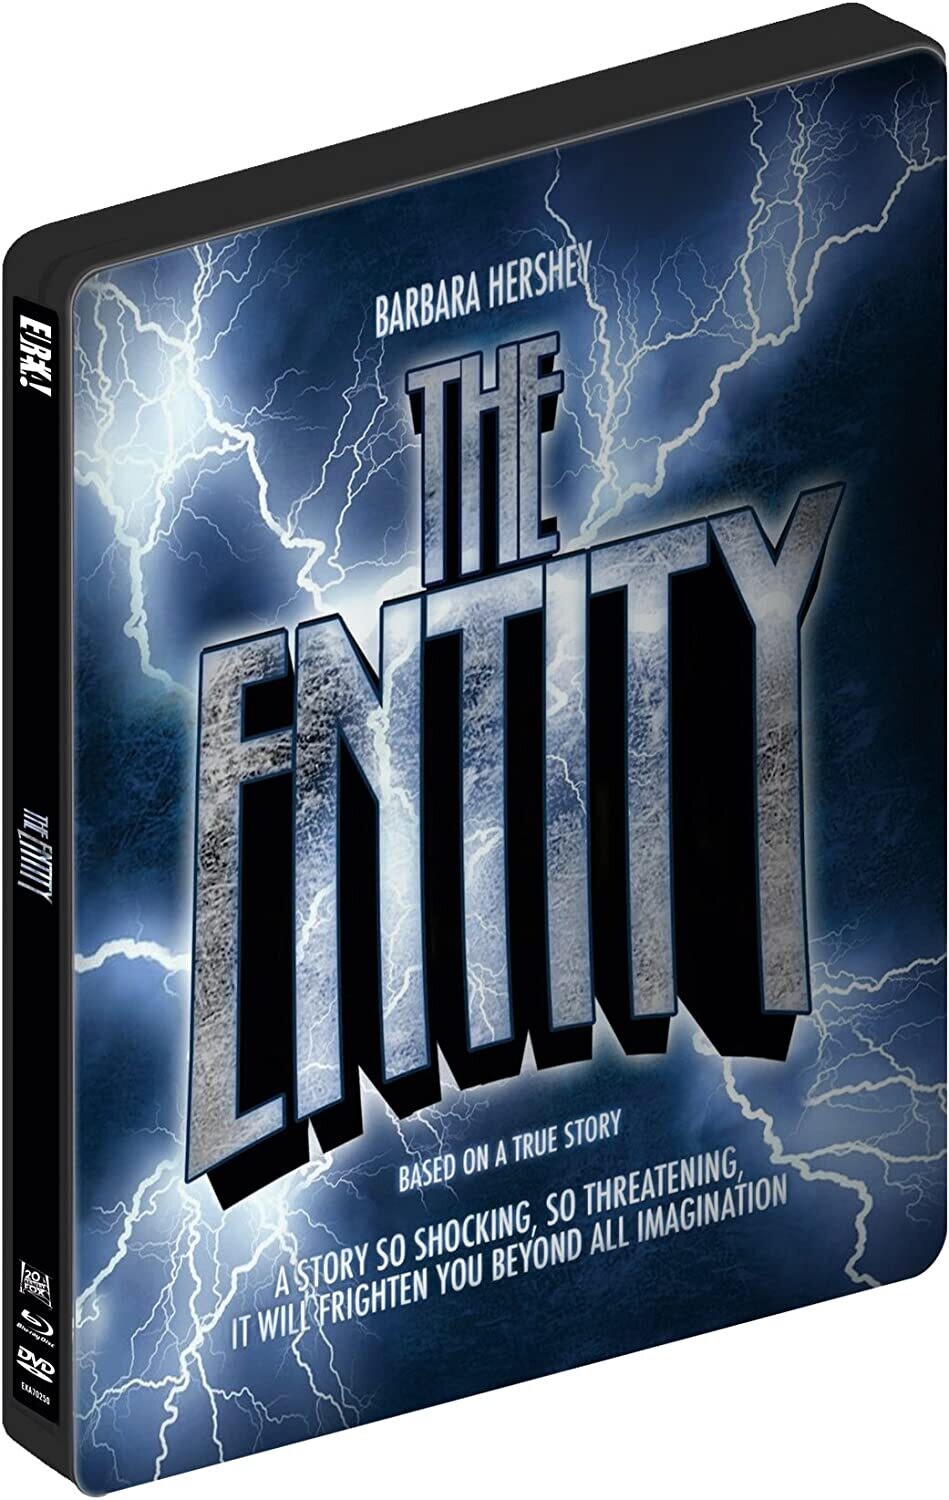 The Entity (1982) Limited Edition Dual Format (DVD & Blu-ray) Steelbook